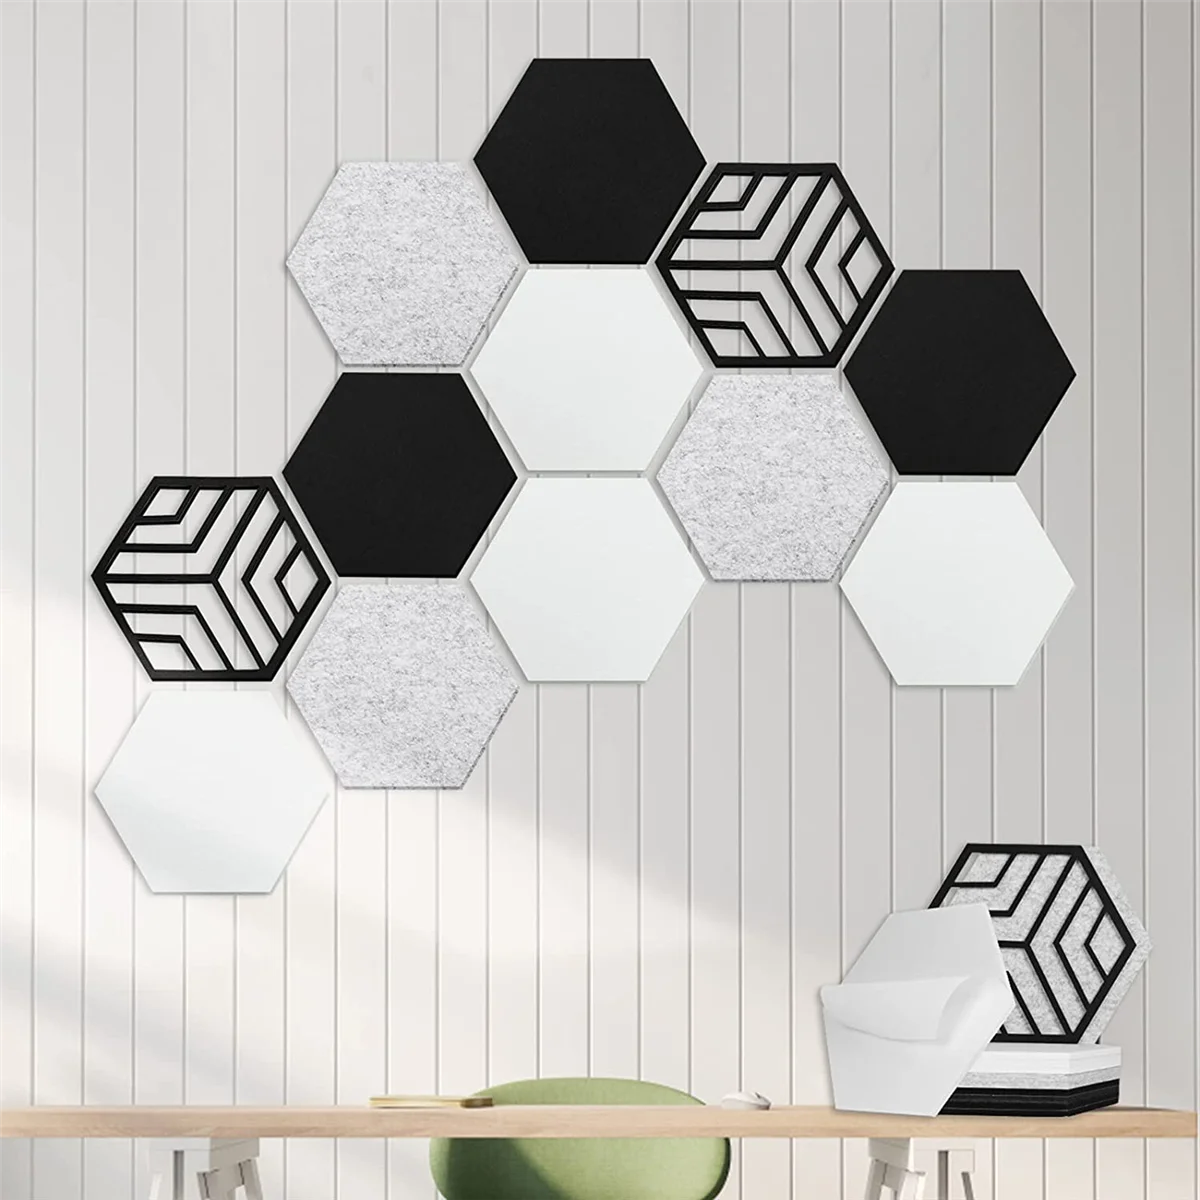 

12 Pcs Self-Adhesive Acoustic Panels,Hexagon Sound Proof Panels,Sound Absorbing Panels for Recording Studio Home,Offices